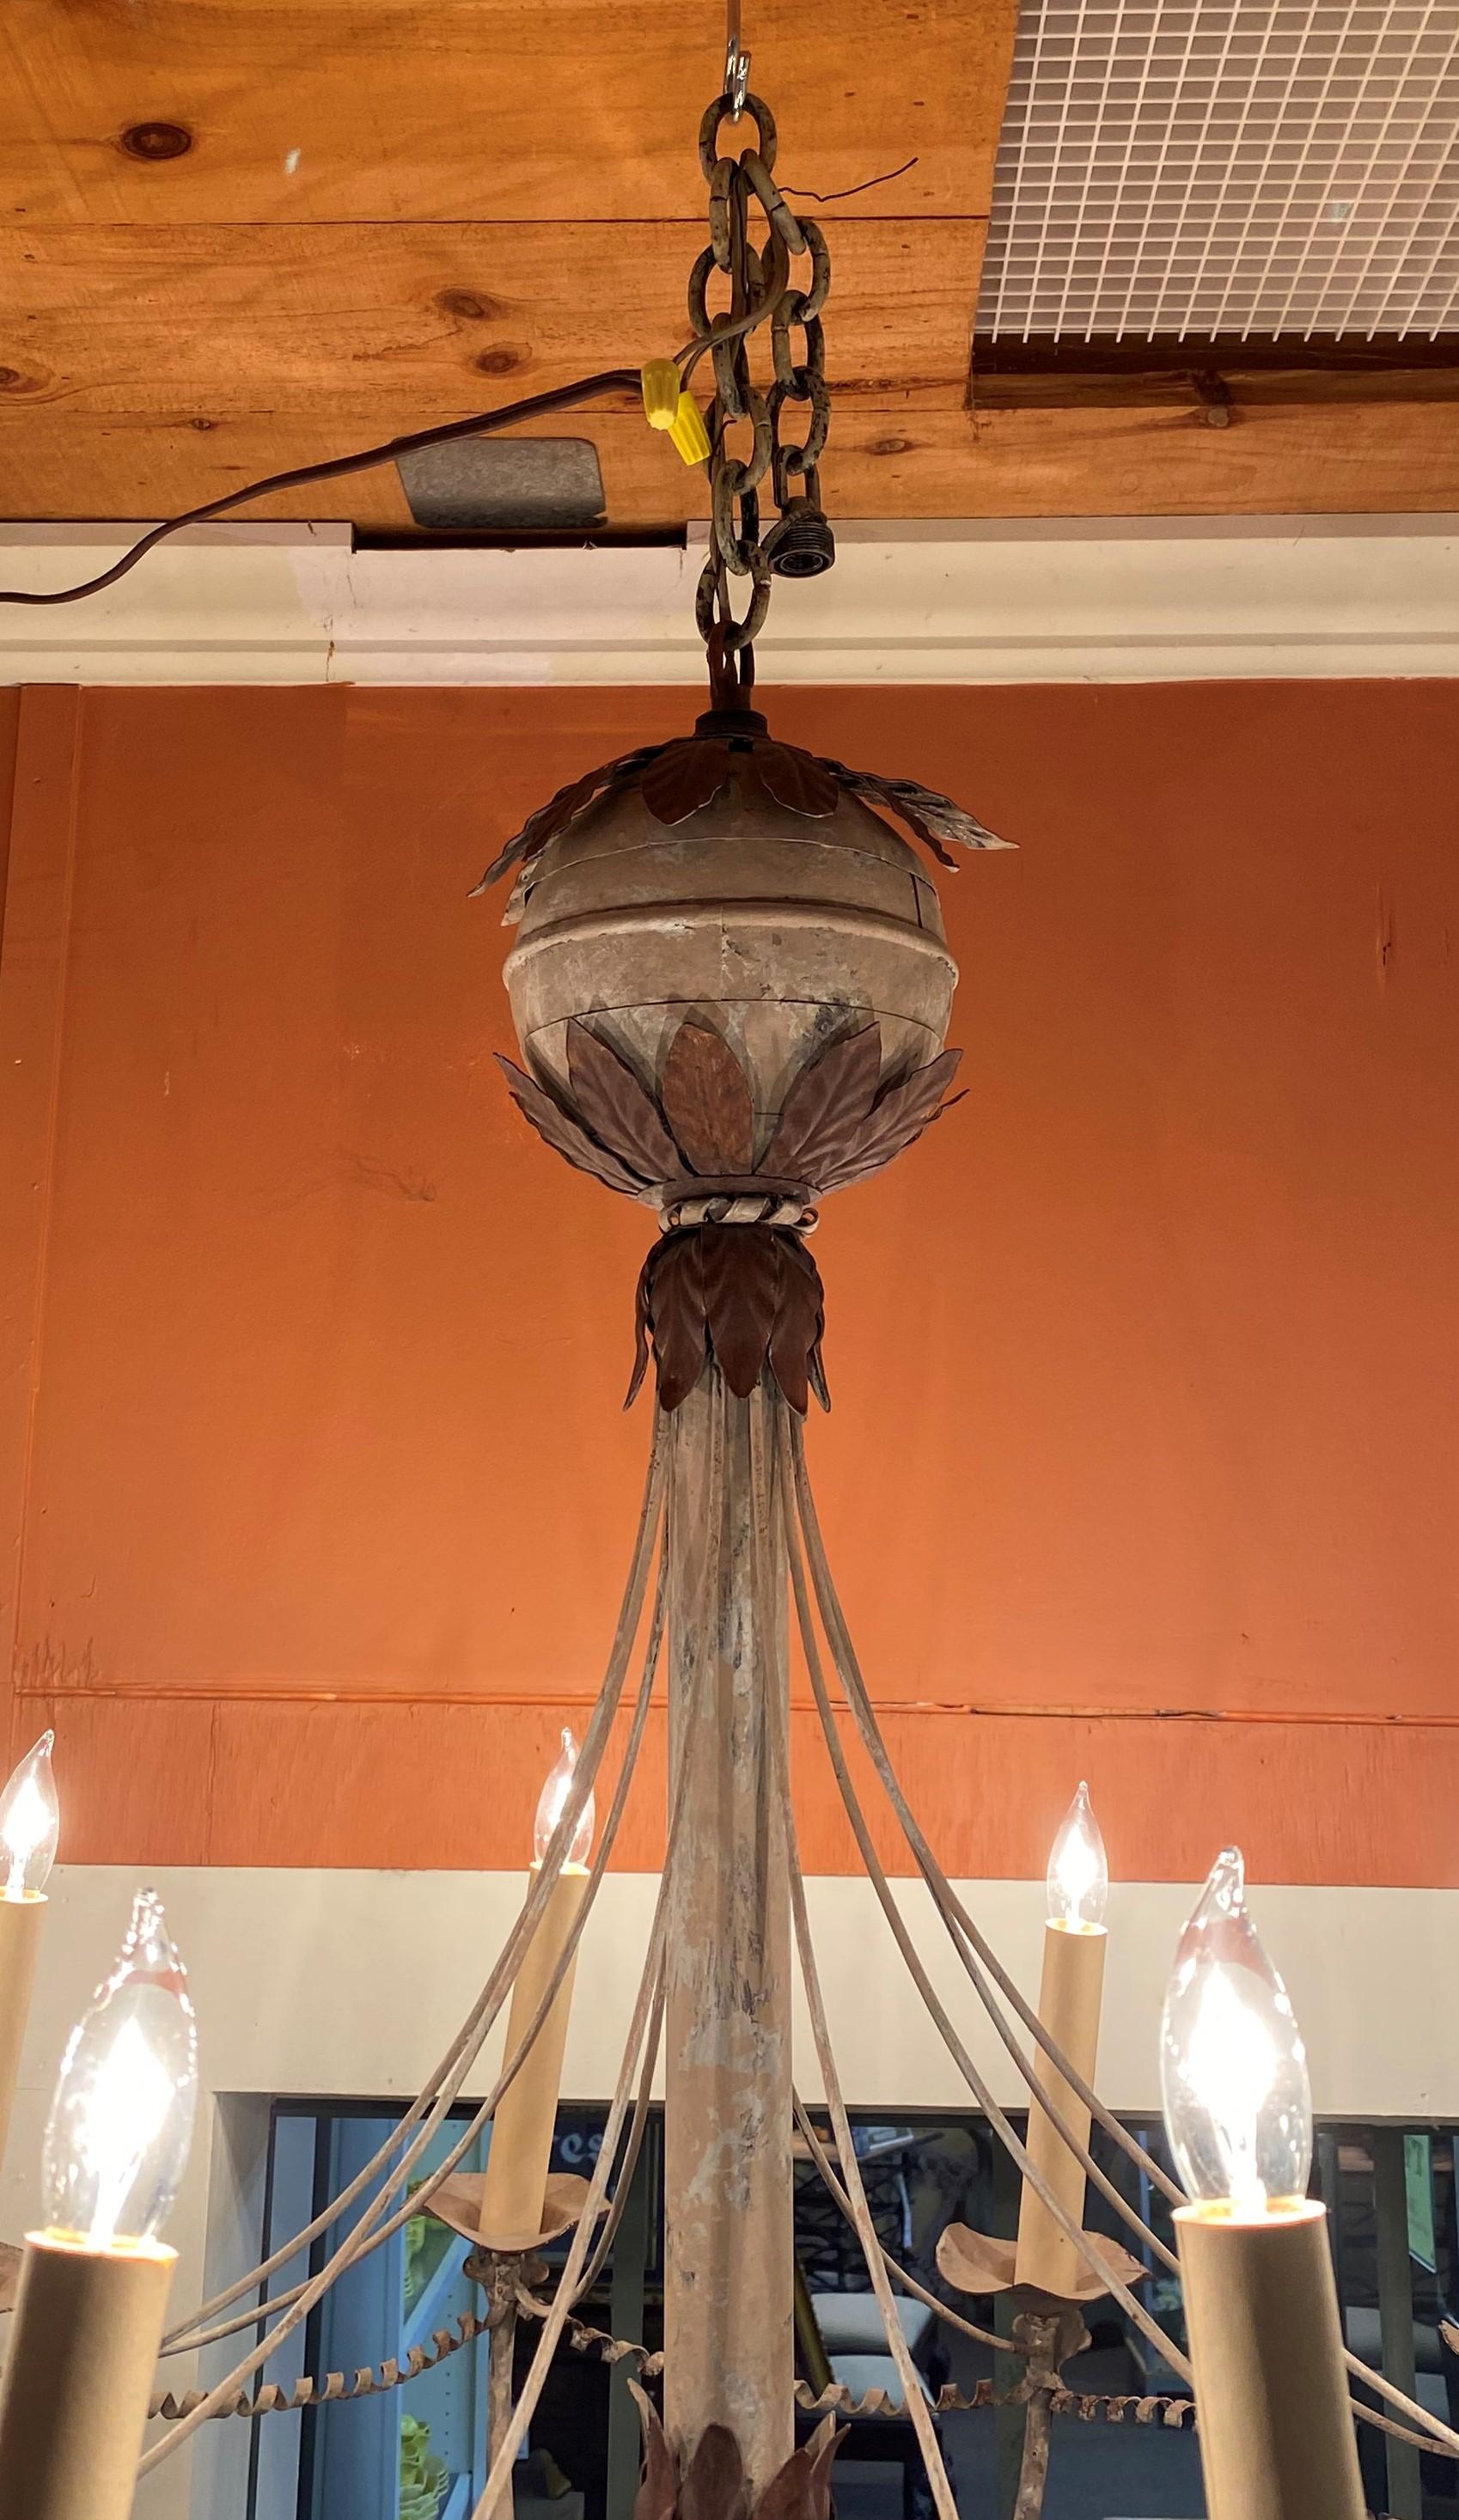 A great form Swedish style tole electrified 10 light chandelier with leaf decorated metal balls at the top and base, with curled metal swags running between the lights. Dates to the late 19th or early 20th century in working condition, with great